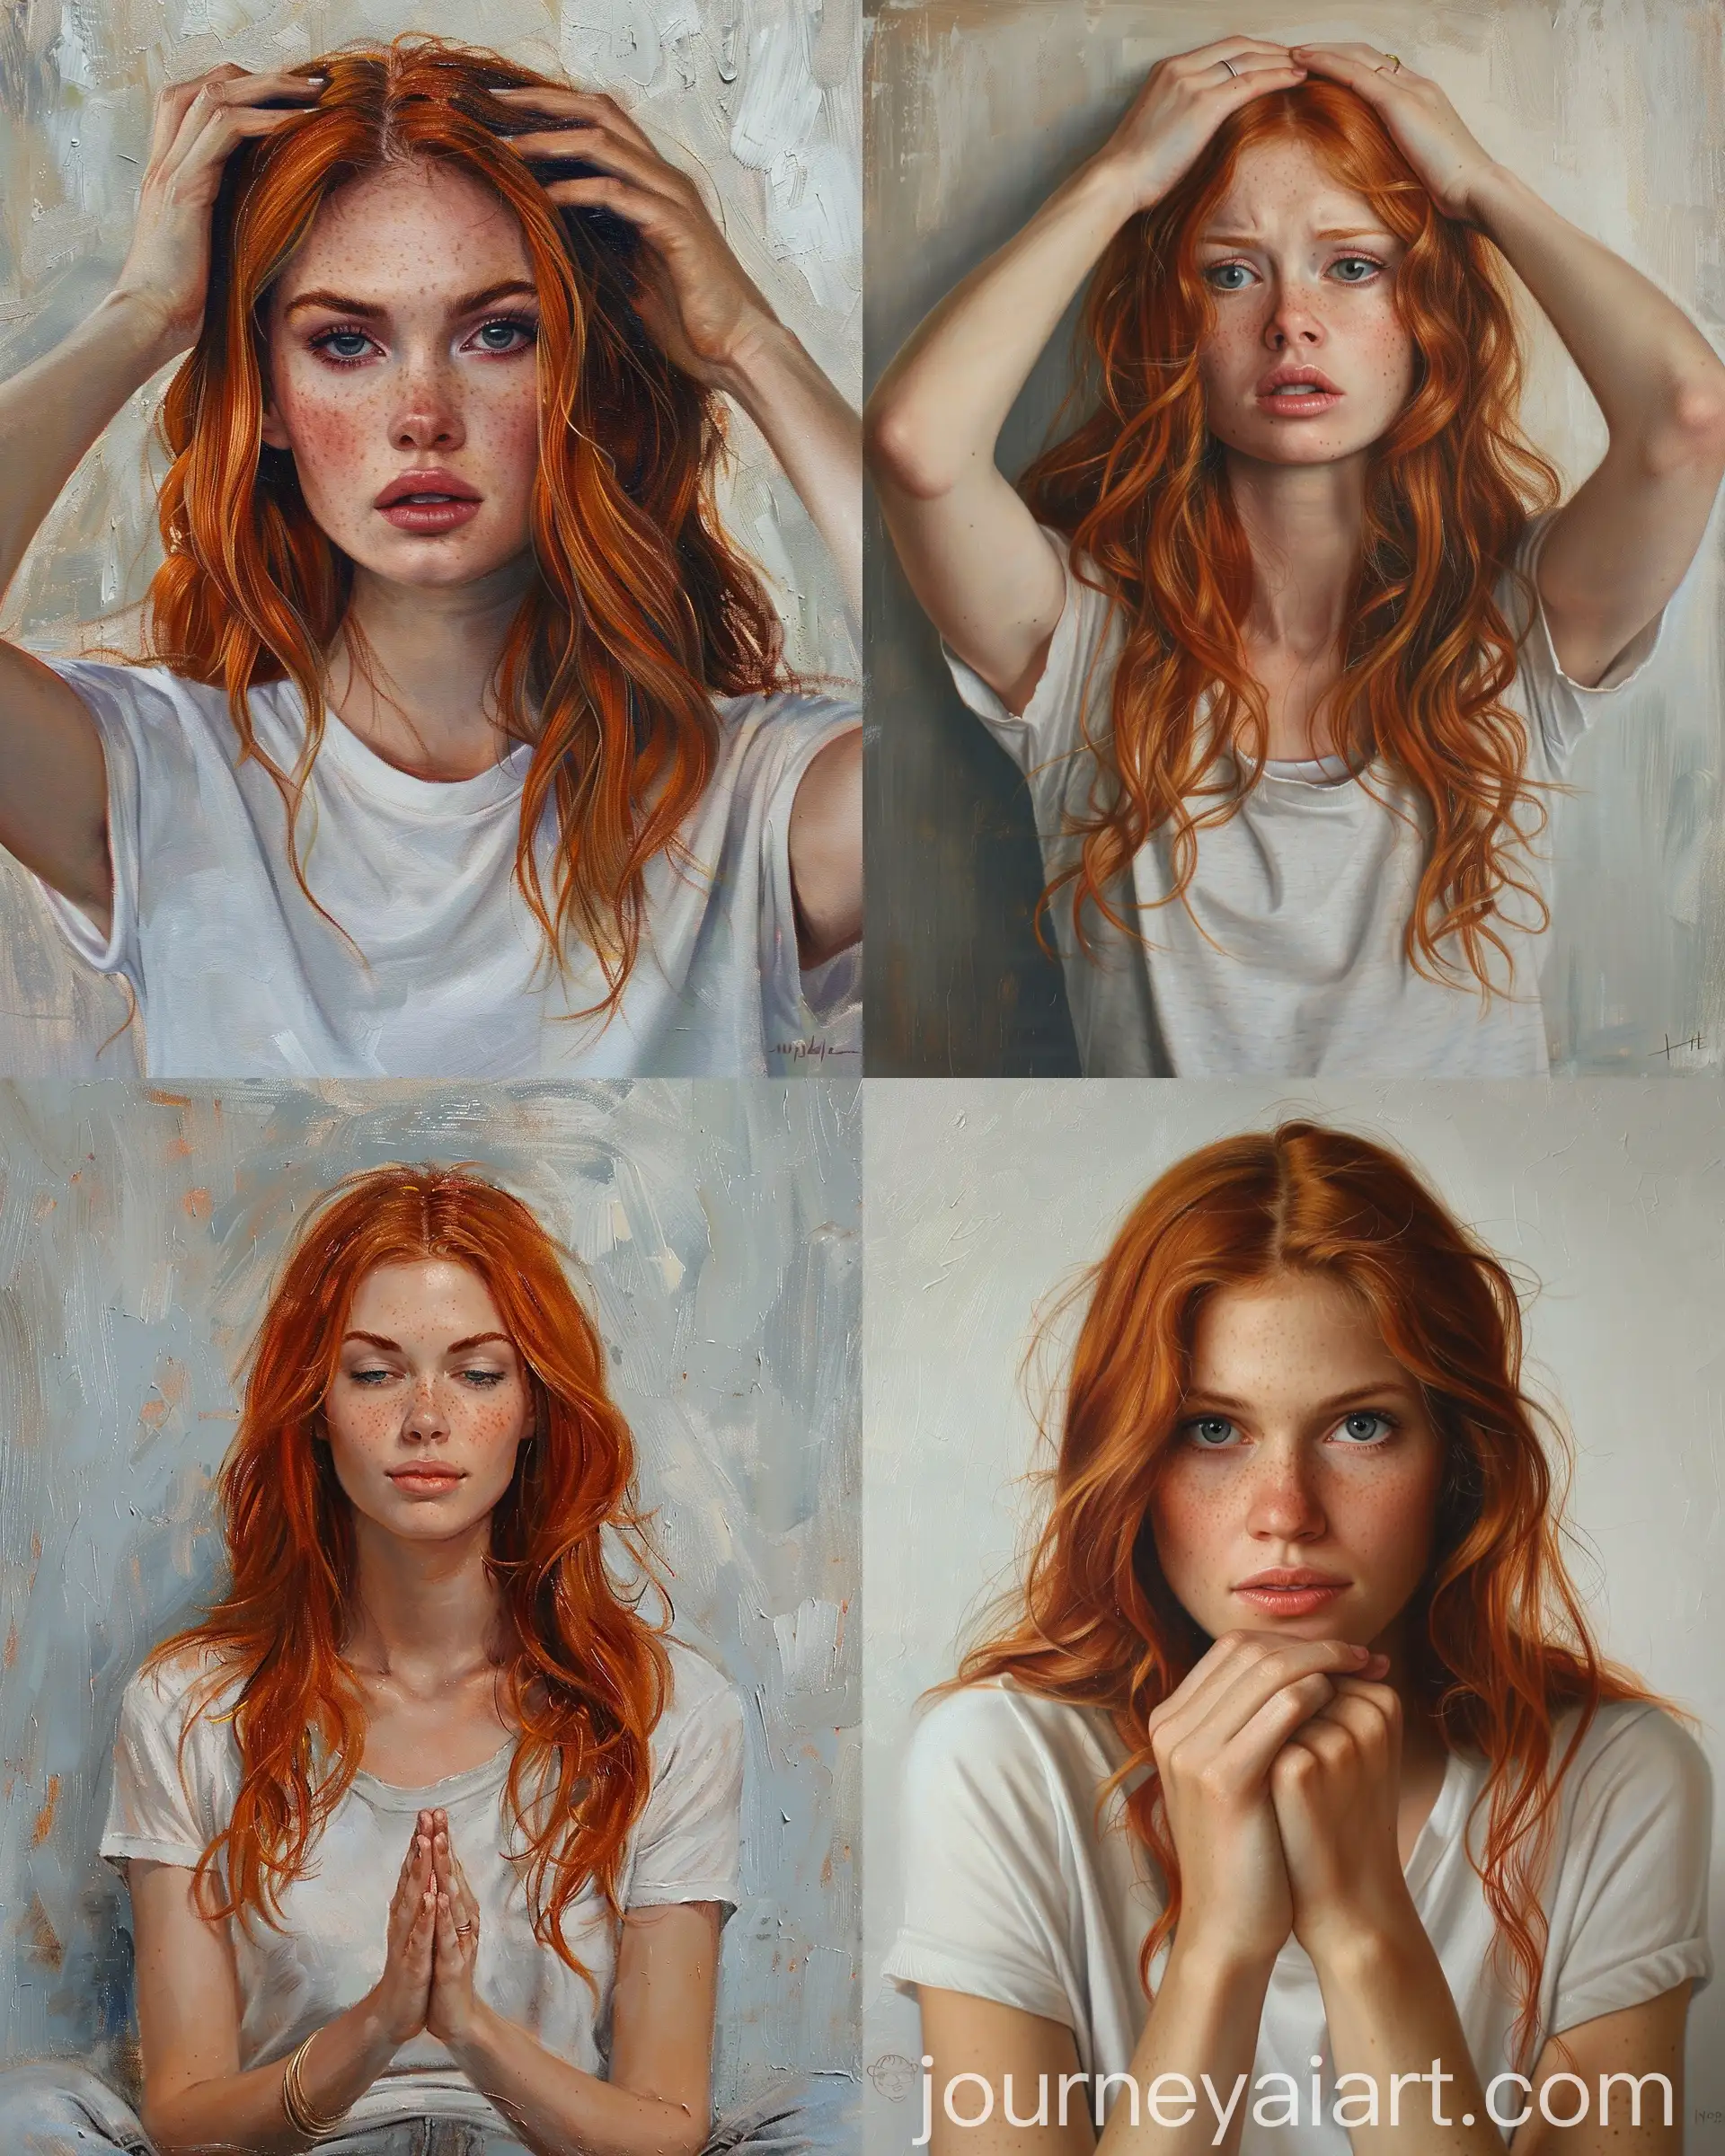 Portrait-of-an-Introspective-RedHaired-Woman-in-White-TShirt